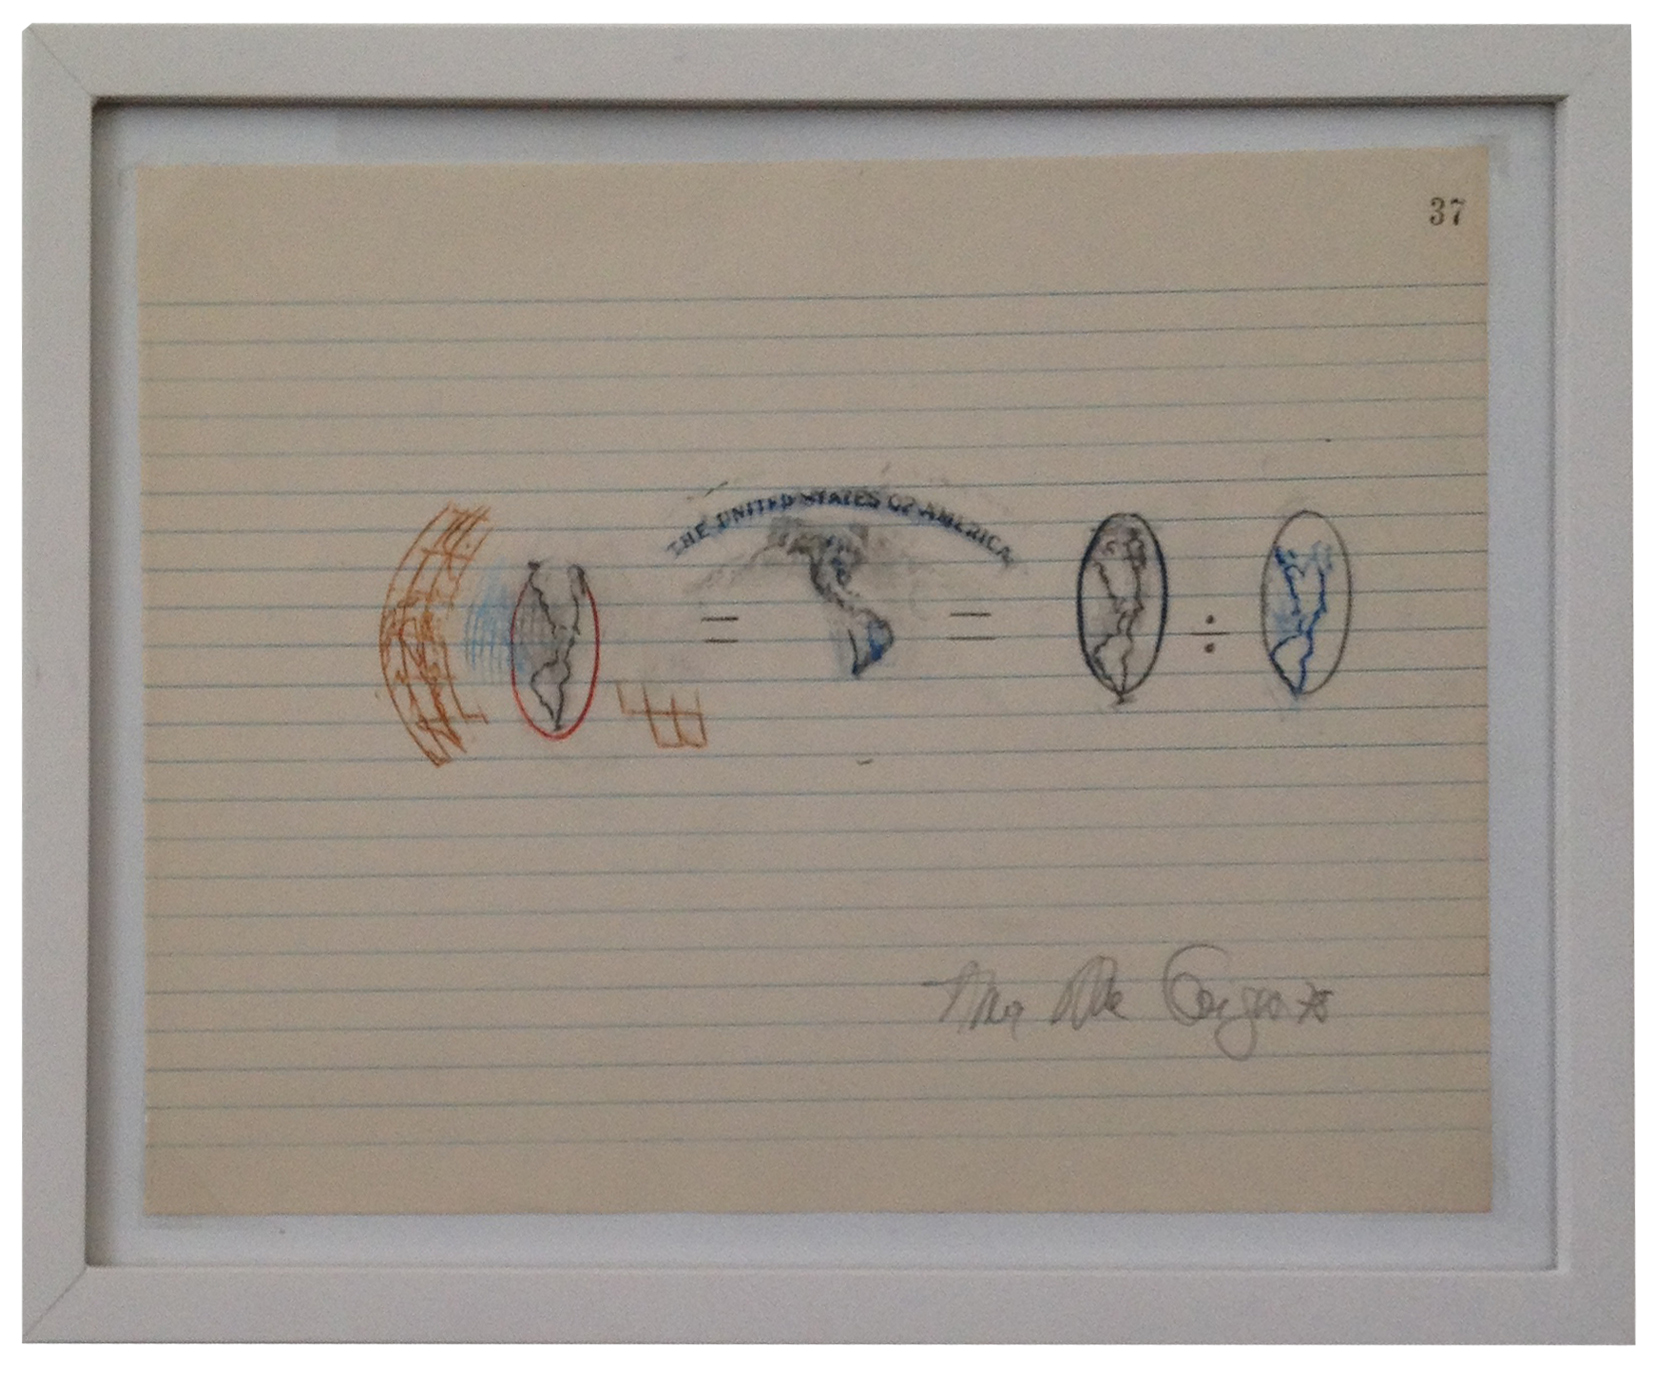 Anna Bella Geiger Variable Equations 1978 Frottage, Graphite, colored pencils on notebook sheet 9 X 13 in